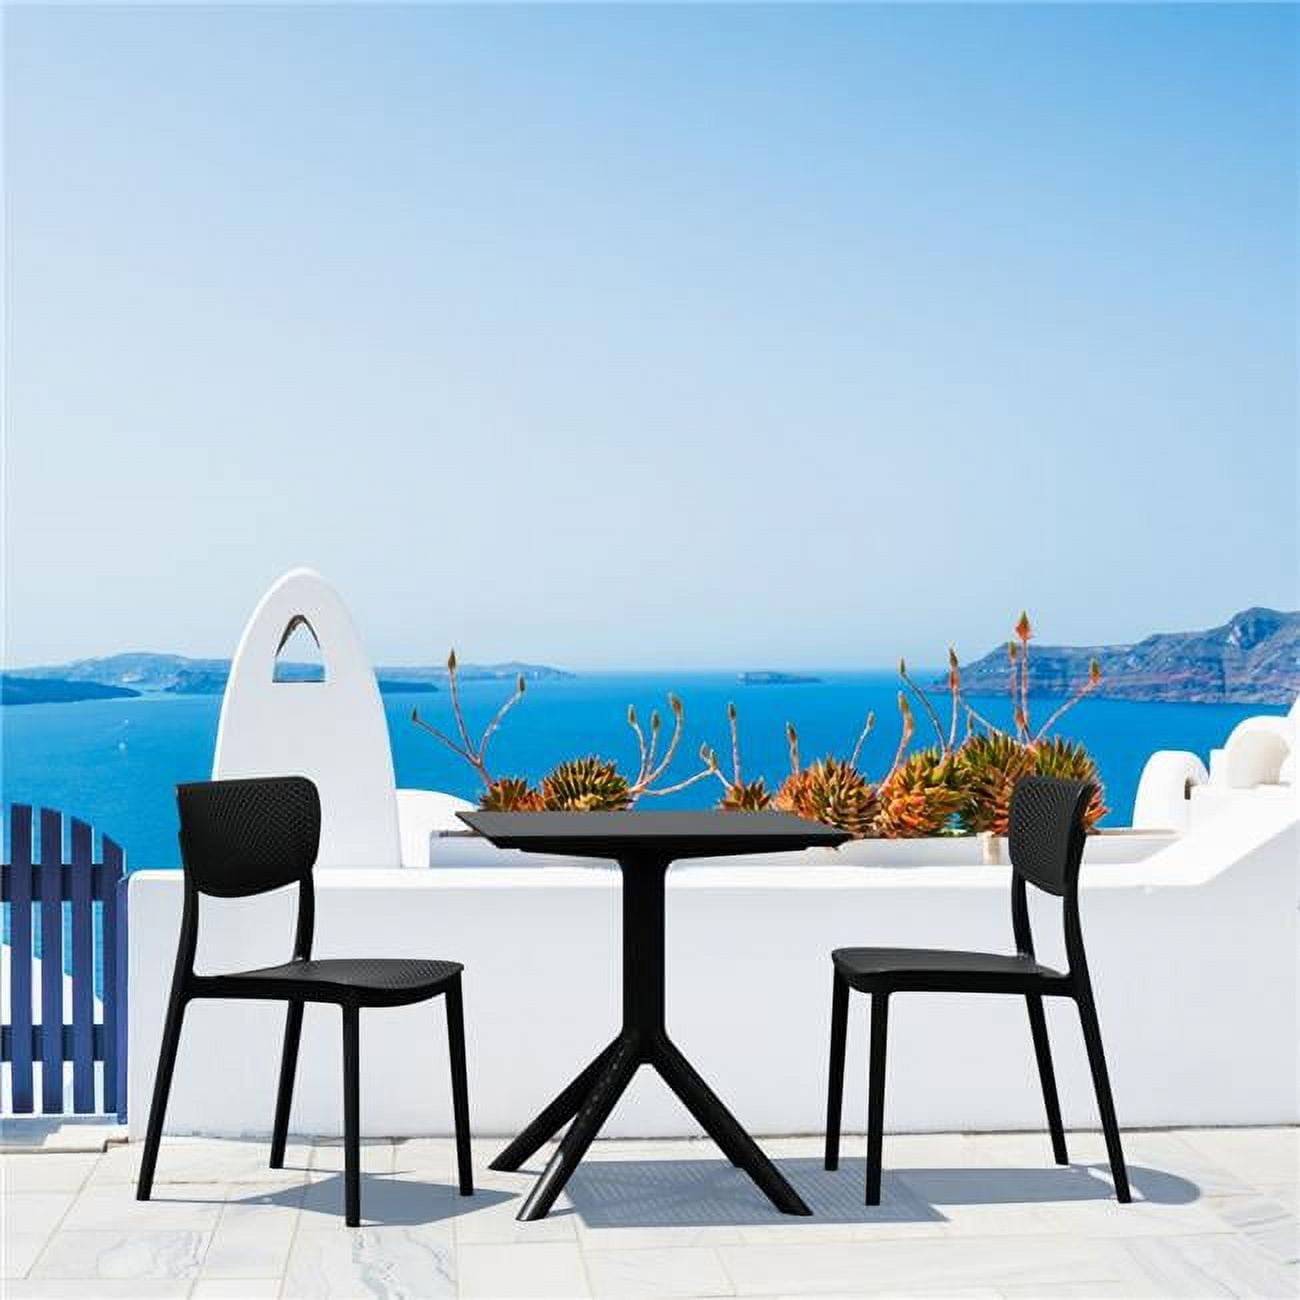 Isp1292s-bla Lucy Outdoor Bistro Set With 27 In. Table Top, Black - 3 Piece